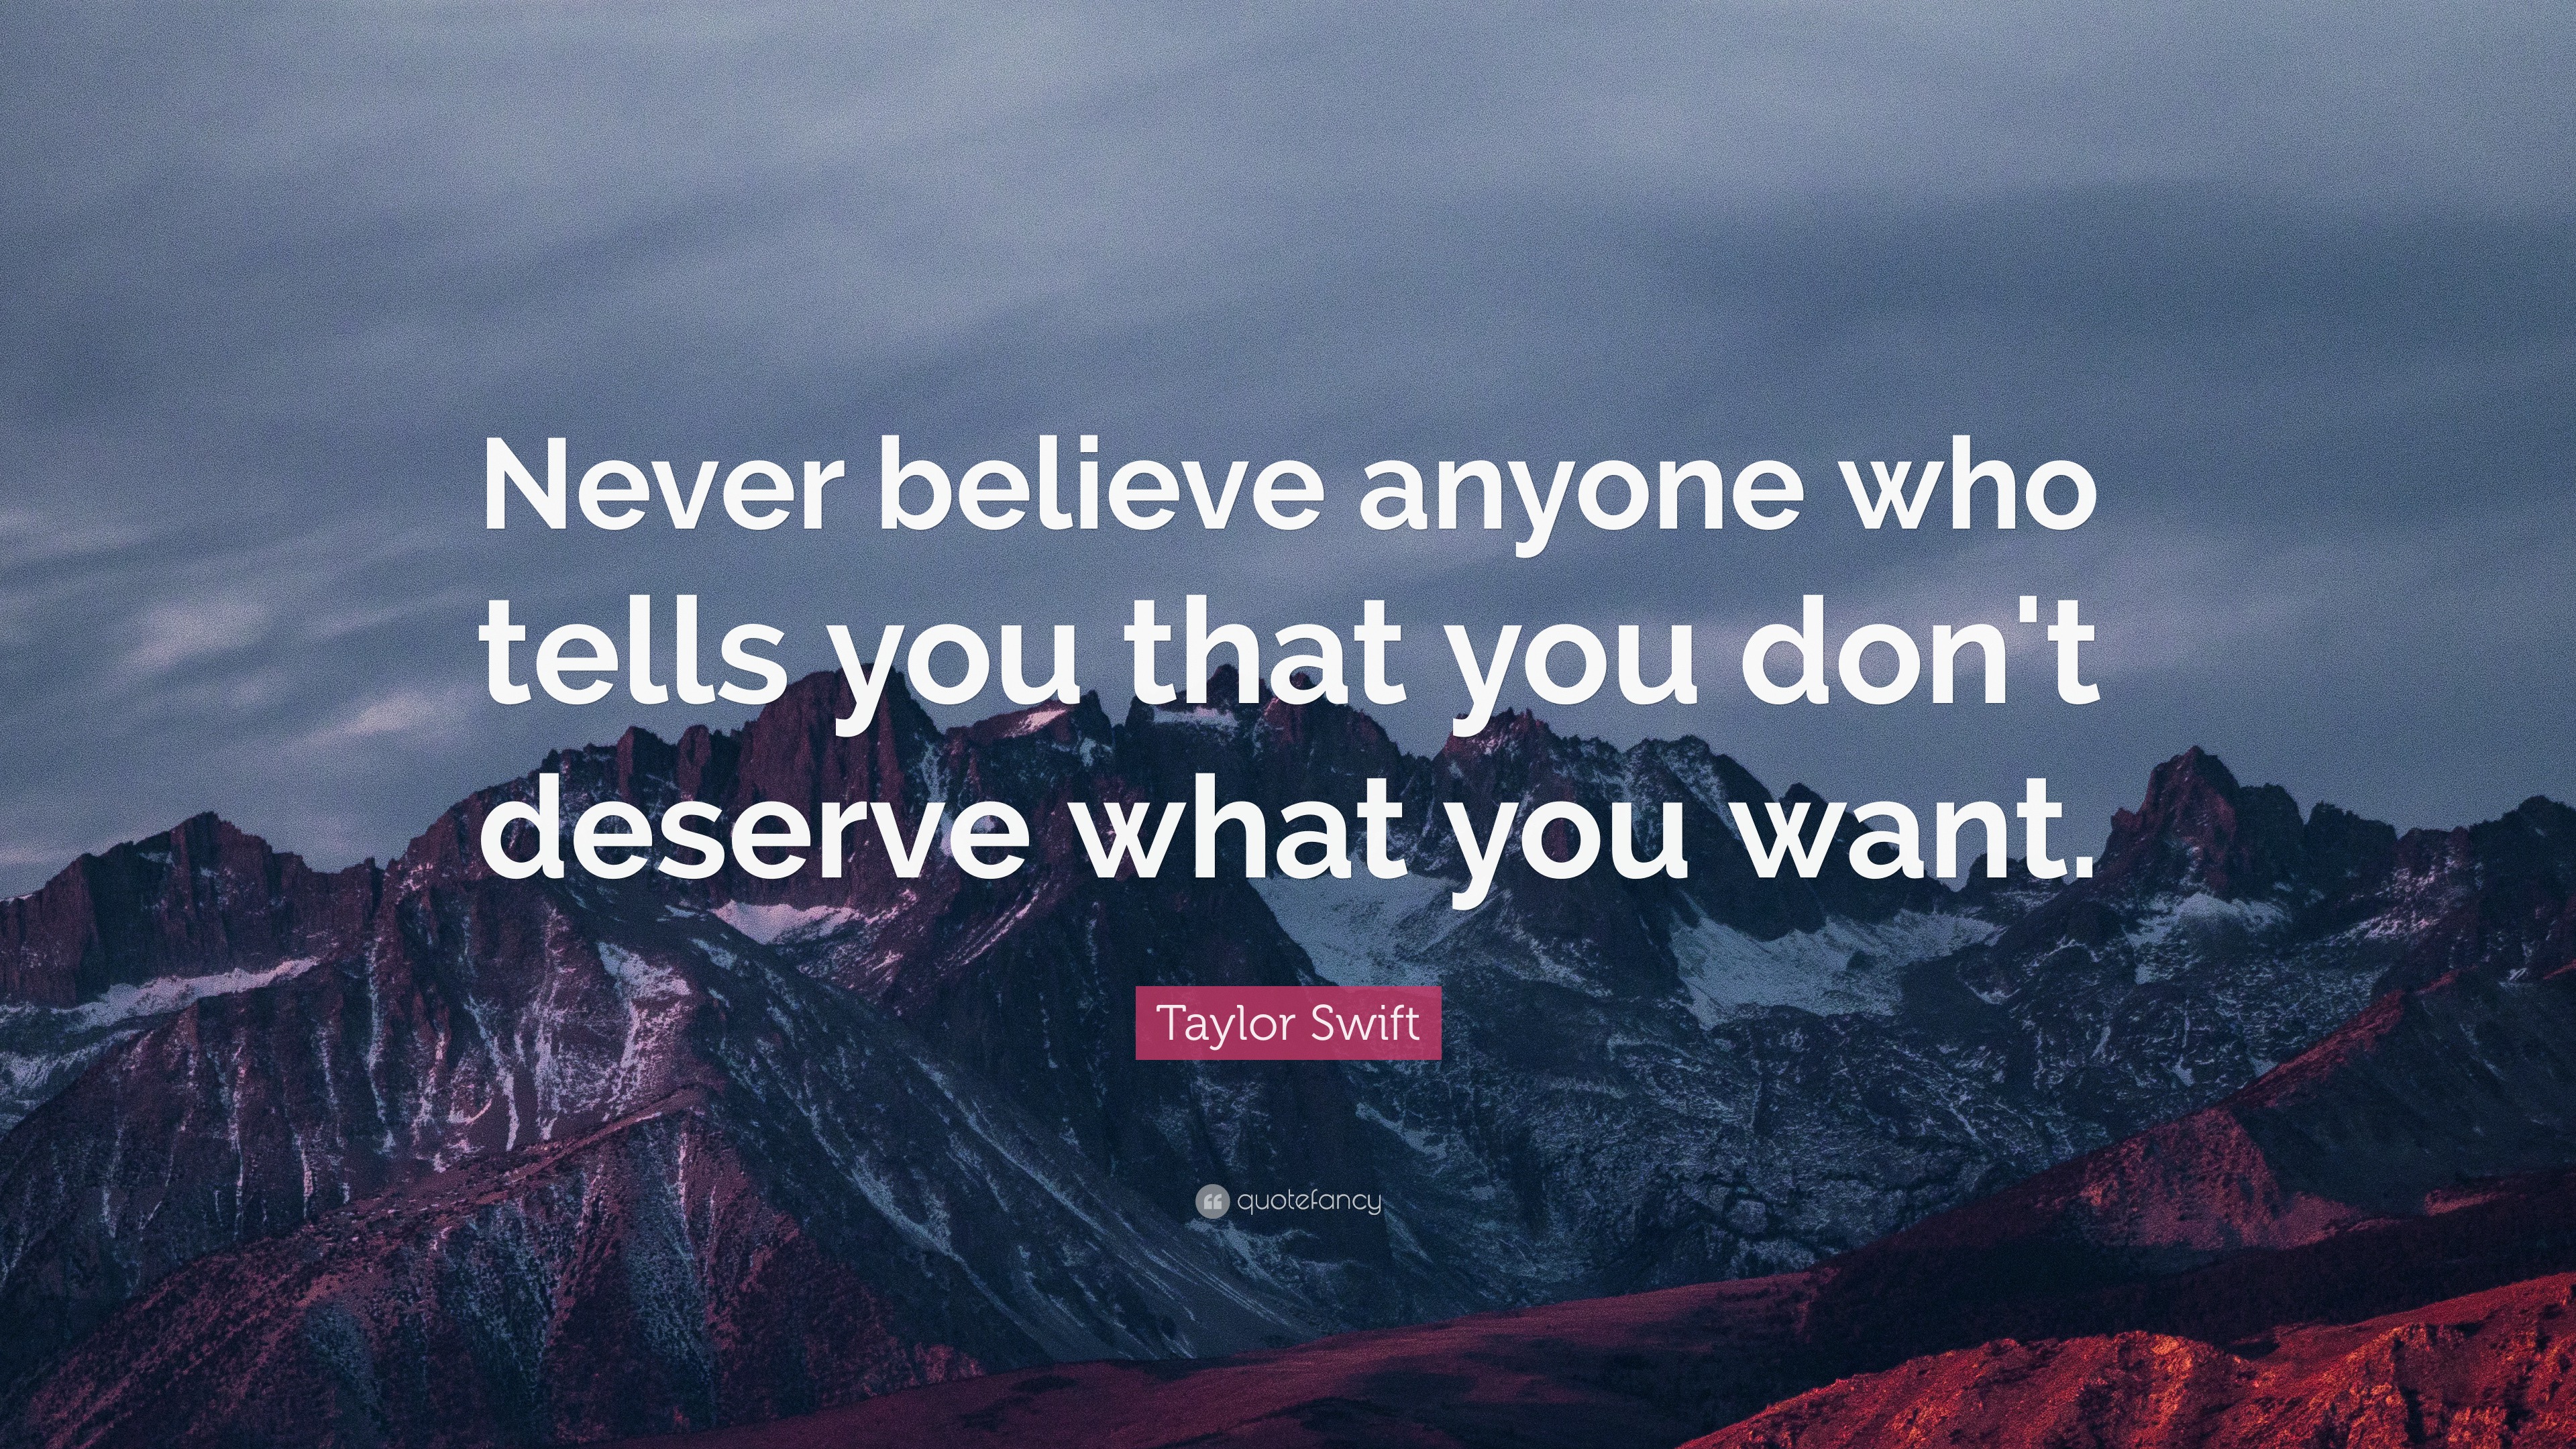 Taylor Swift Quote: “Never believe anyone who tells you that you don't ...